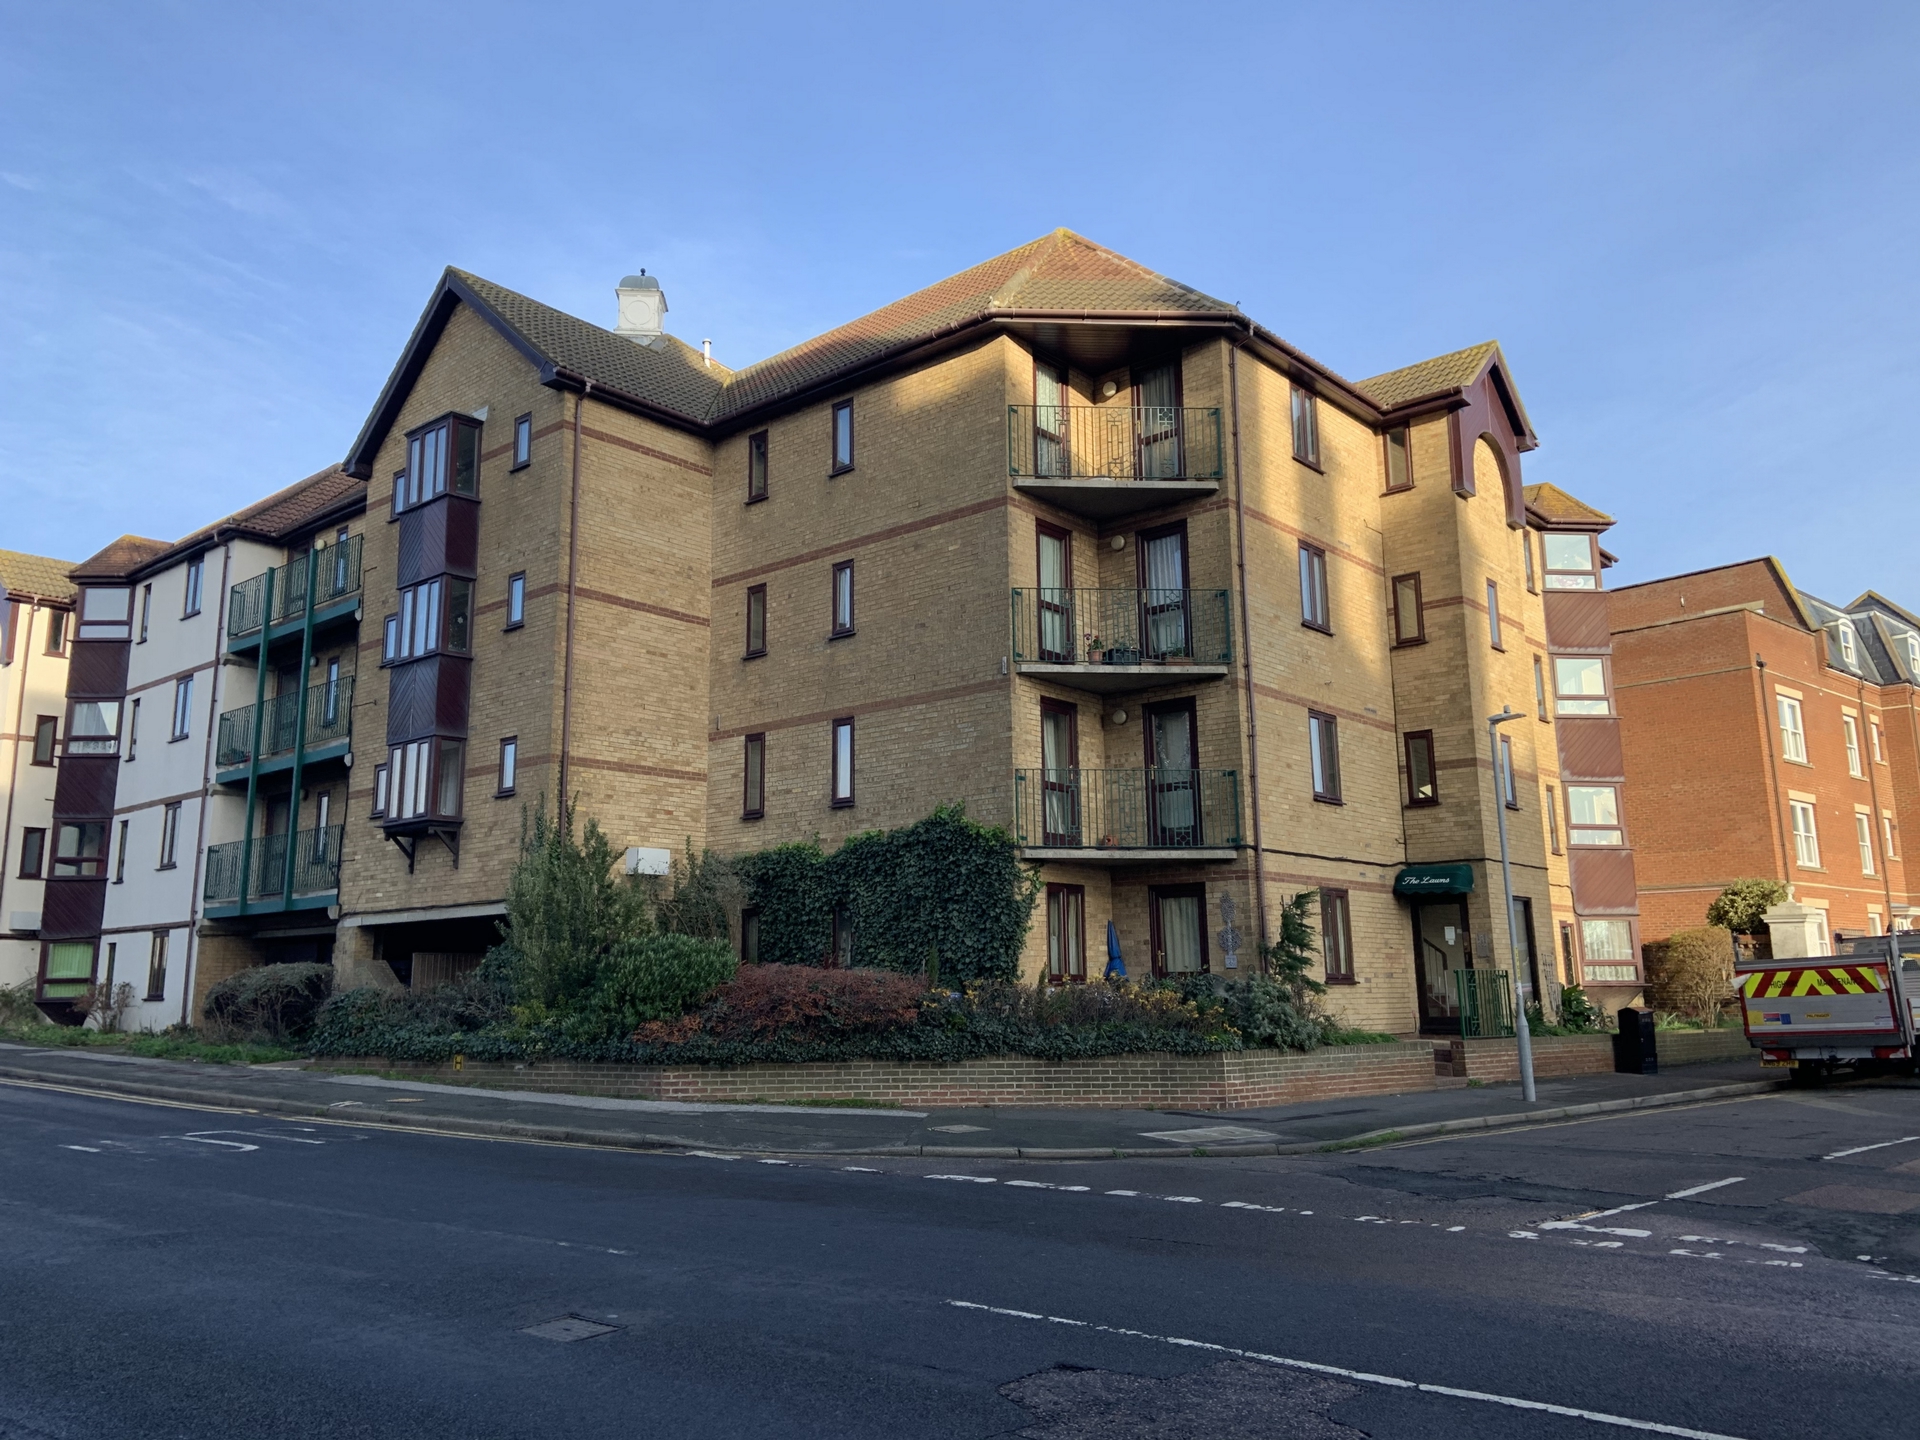 Henderson Setterfield is delighted to offer this 2 bed 1st floor flat which has been fully redecorated.    The property comprises 1 double and 1 single bedroom, fitted kitchen including hob, oven and extractor fan and there is also a large bright and airy lounge. There is a lift in the building. 